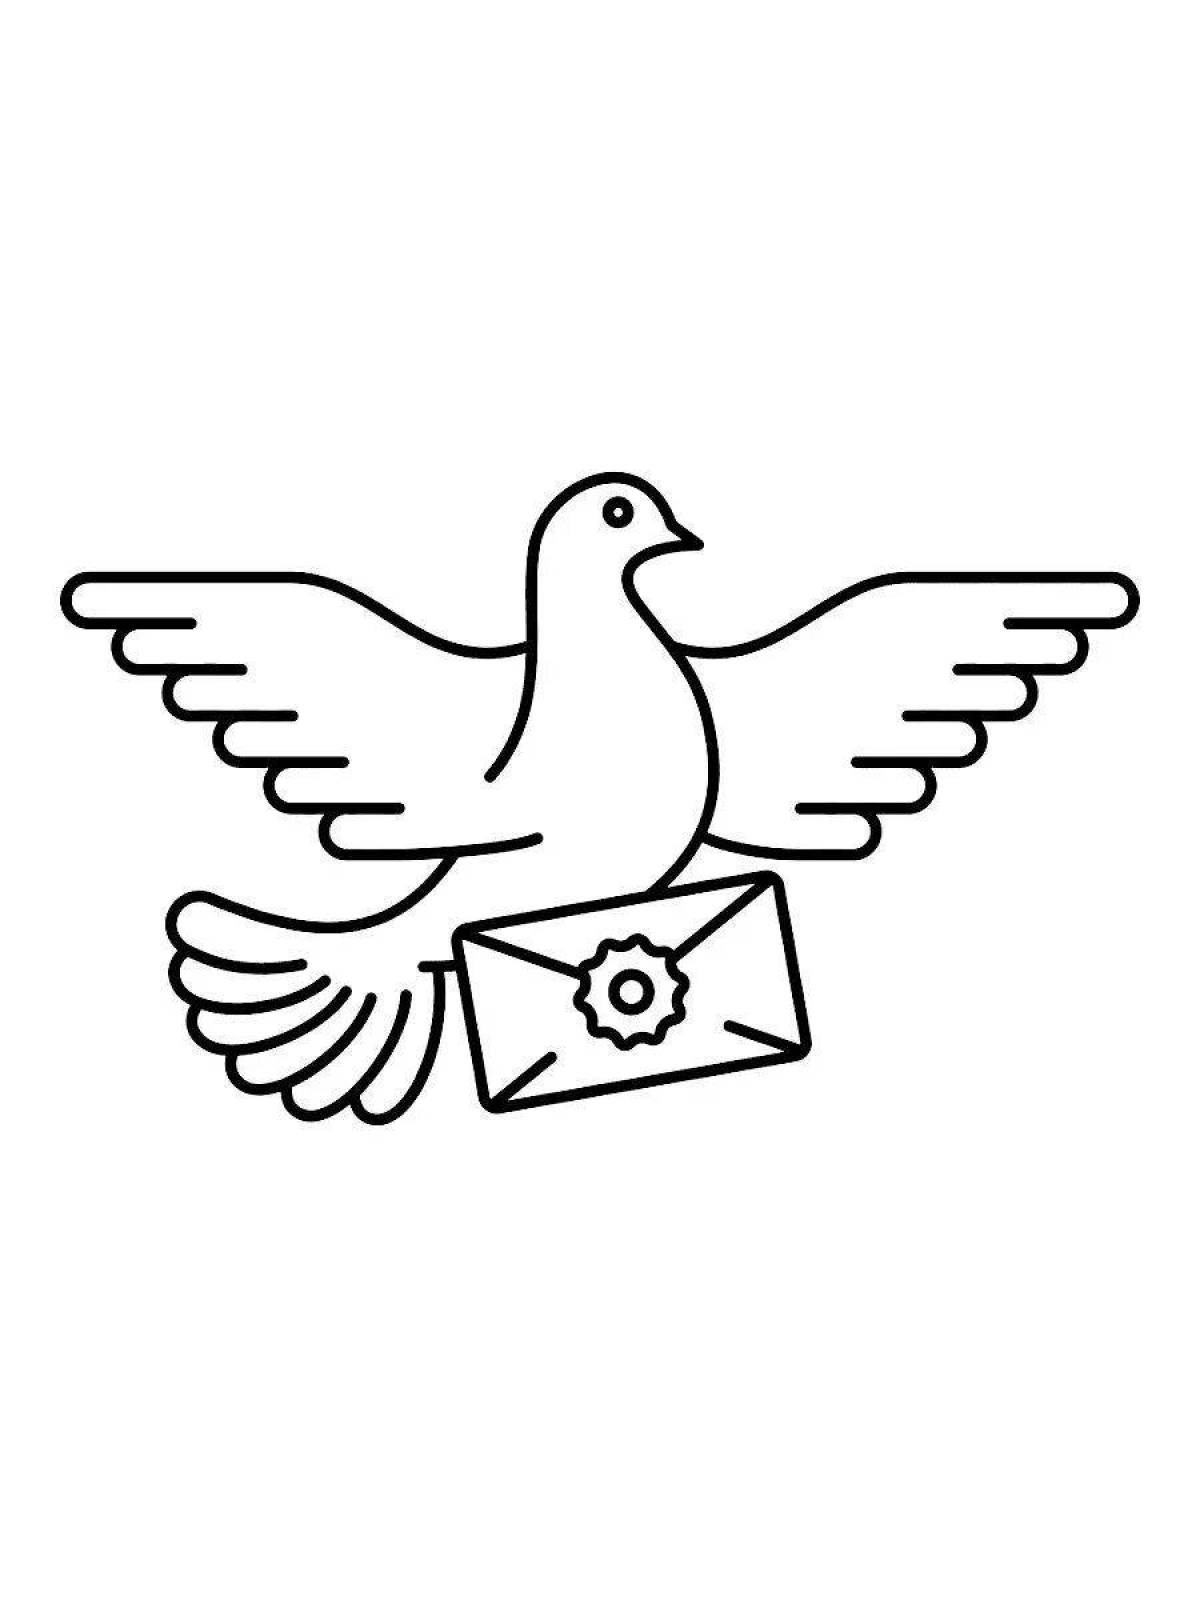 Sparkling carrier pigeon coloring page